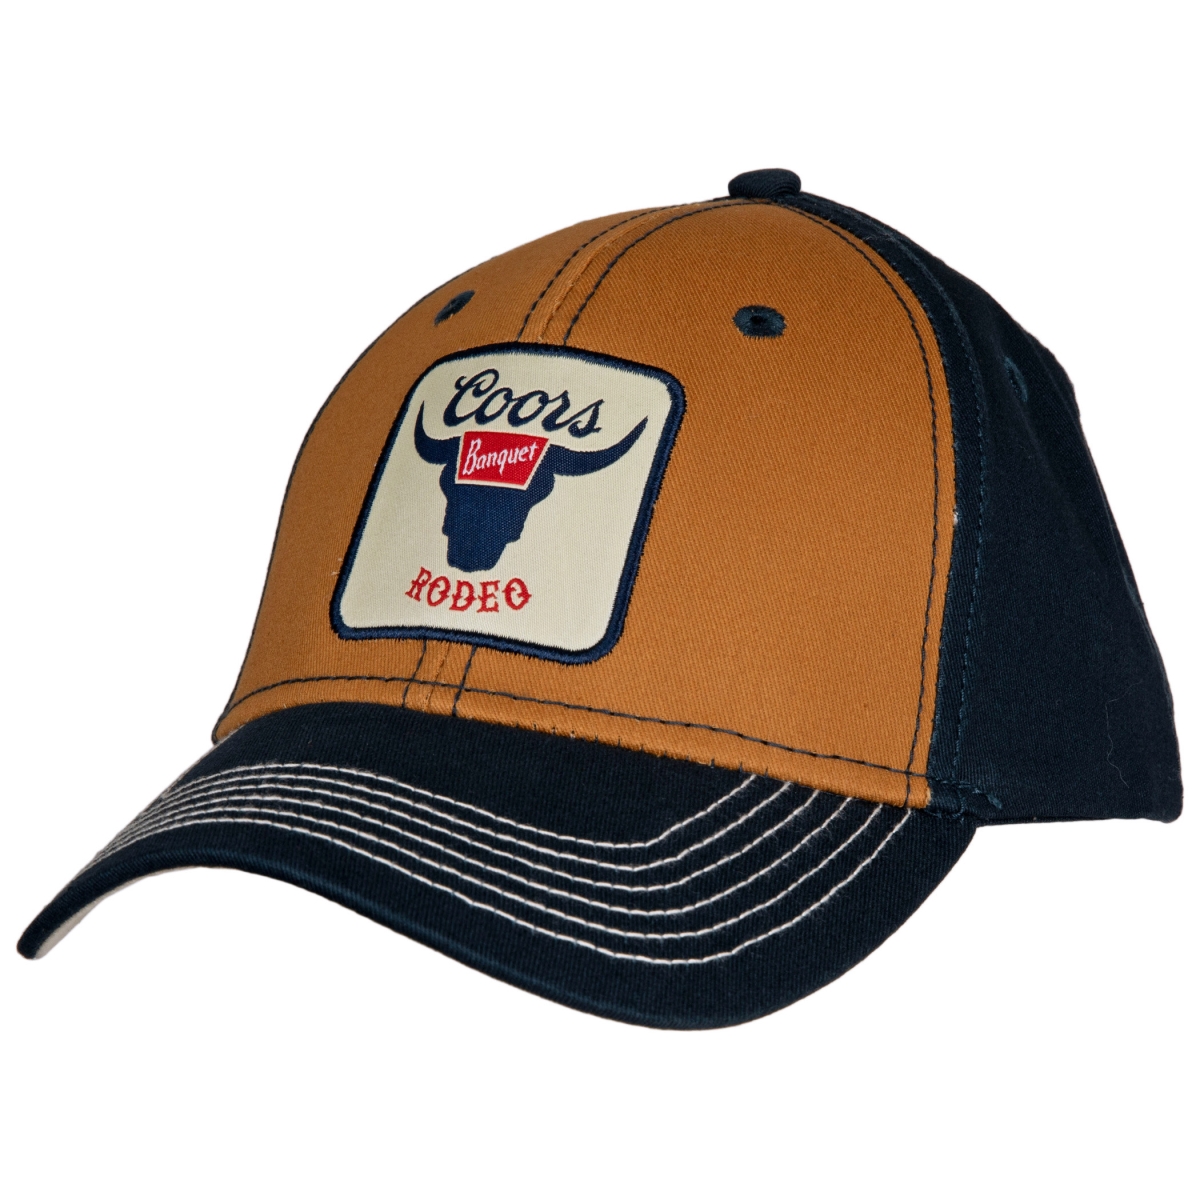 Picture of Coors 845588 Coors Banquet Rodeo Cotton Twill Snapback Hat